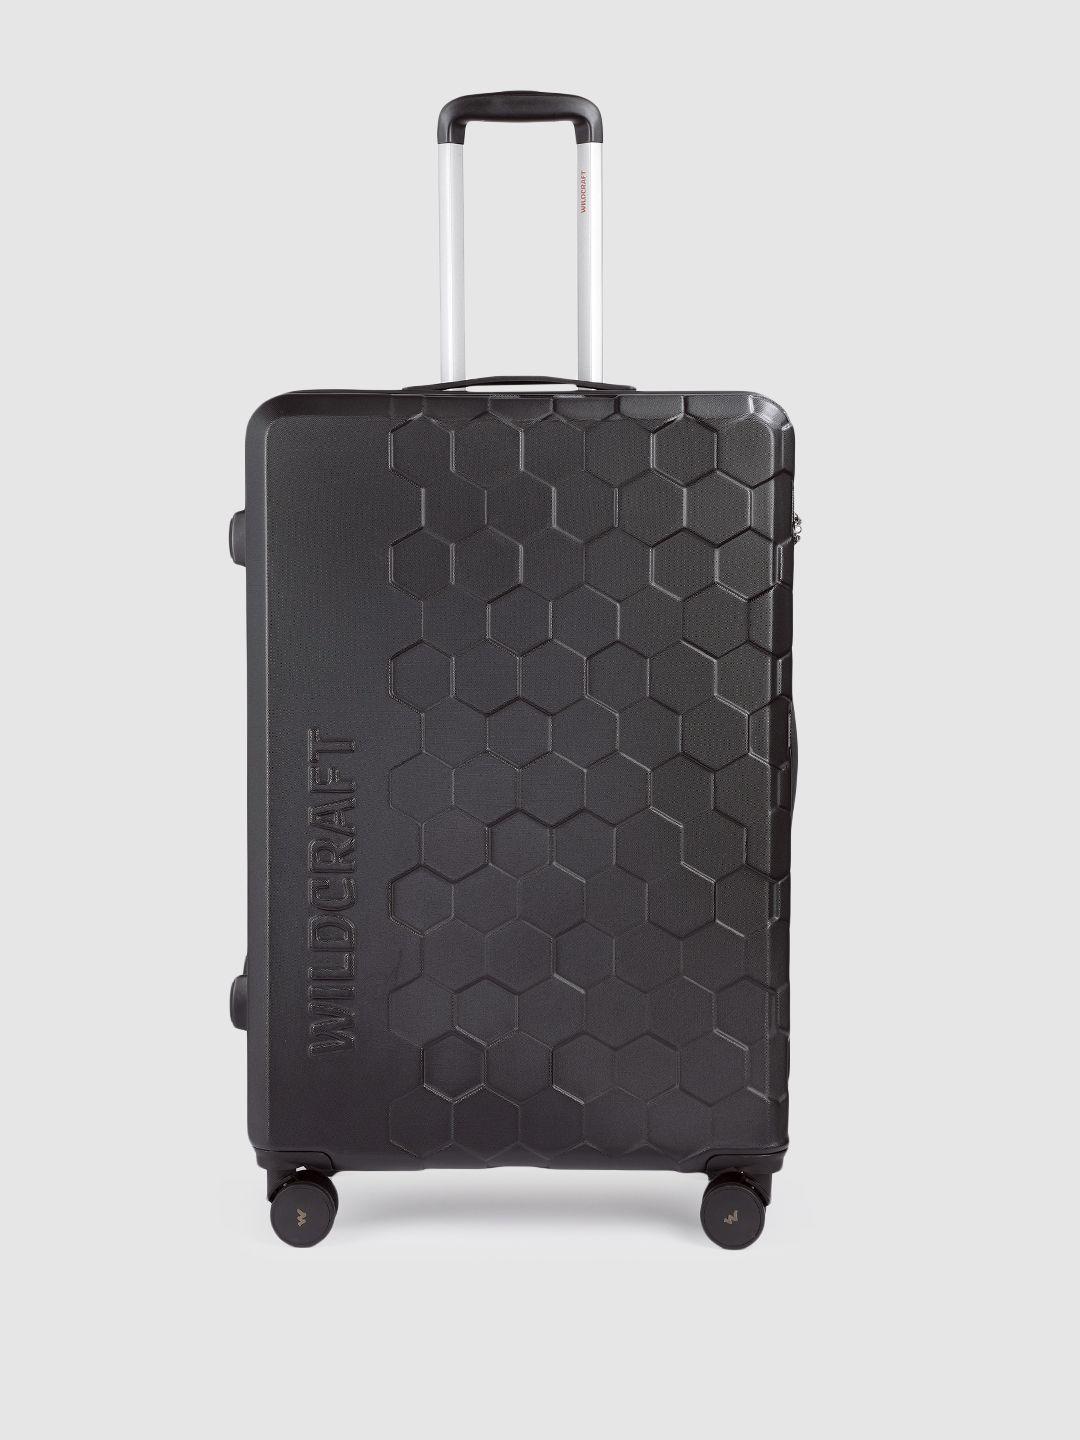 wildcraft-navy-black-textured-pyxis-large-trolley-suitcase